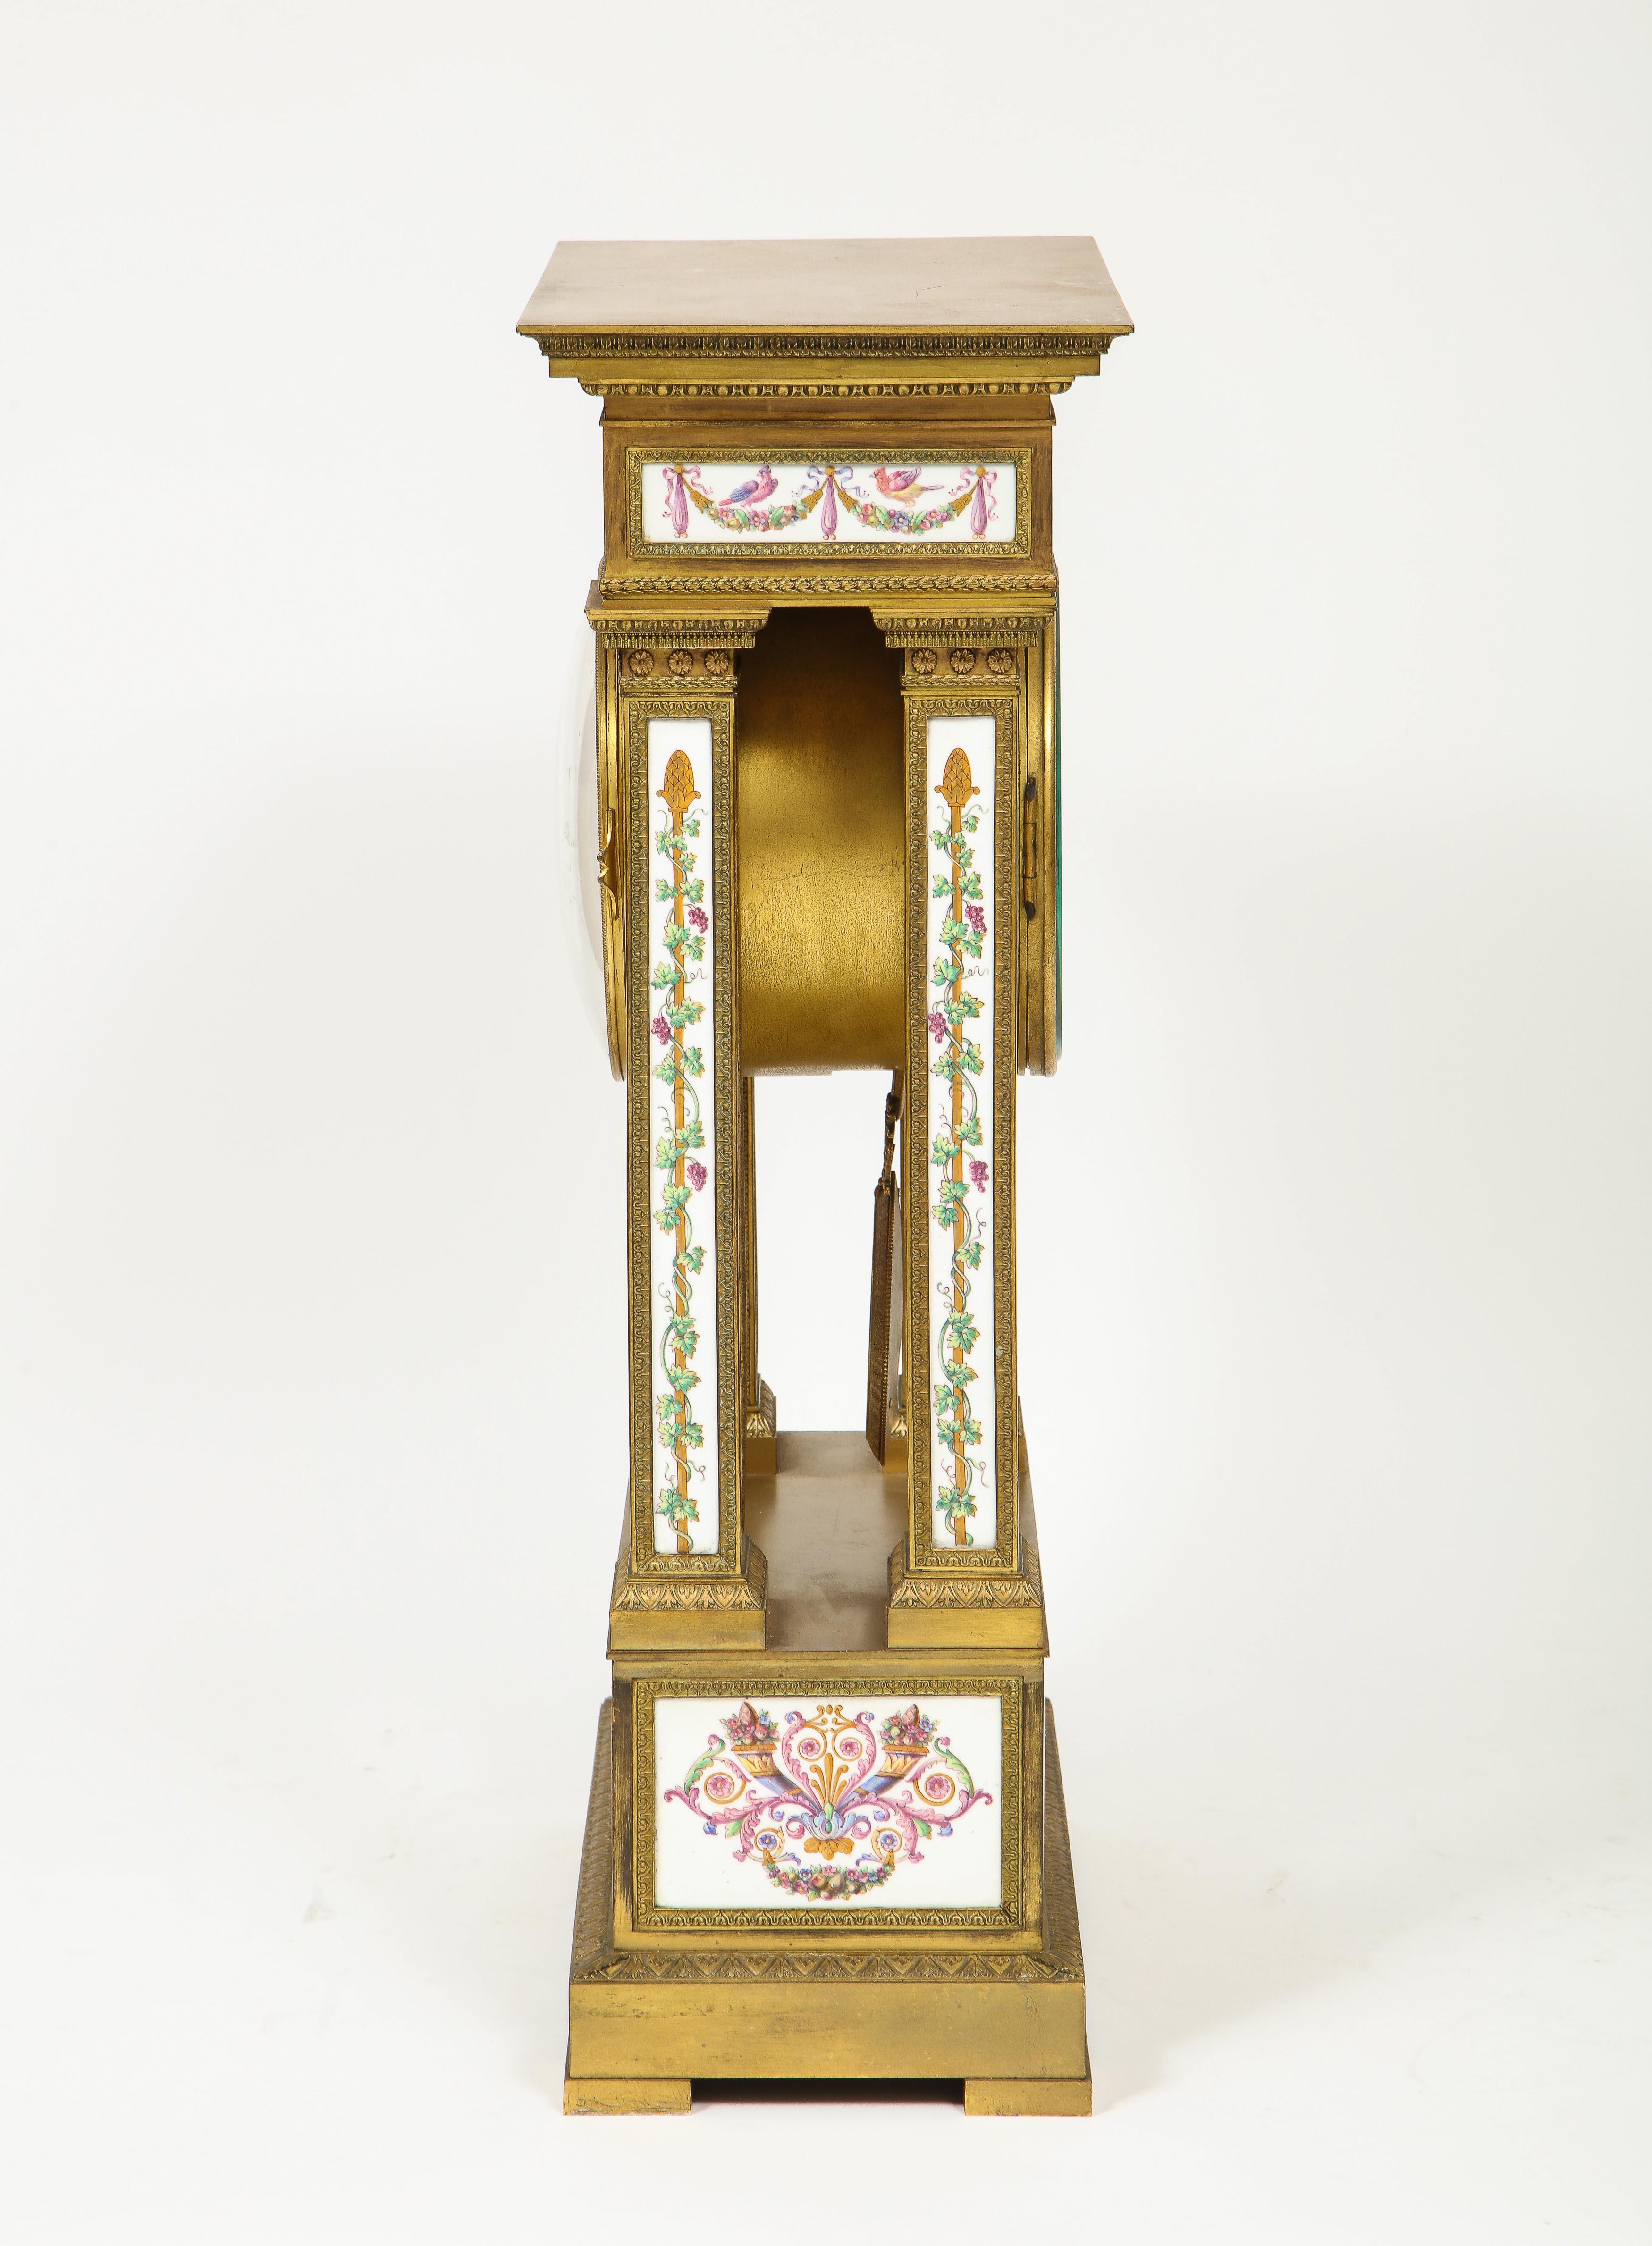 A Rare and Exquisite French Ormolu and Porcelain Clock, attributed to Deniere  For Sale 3